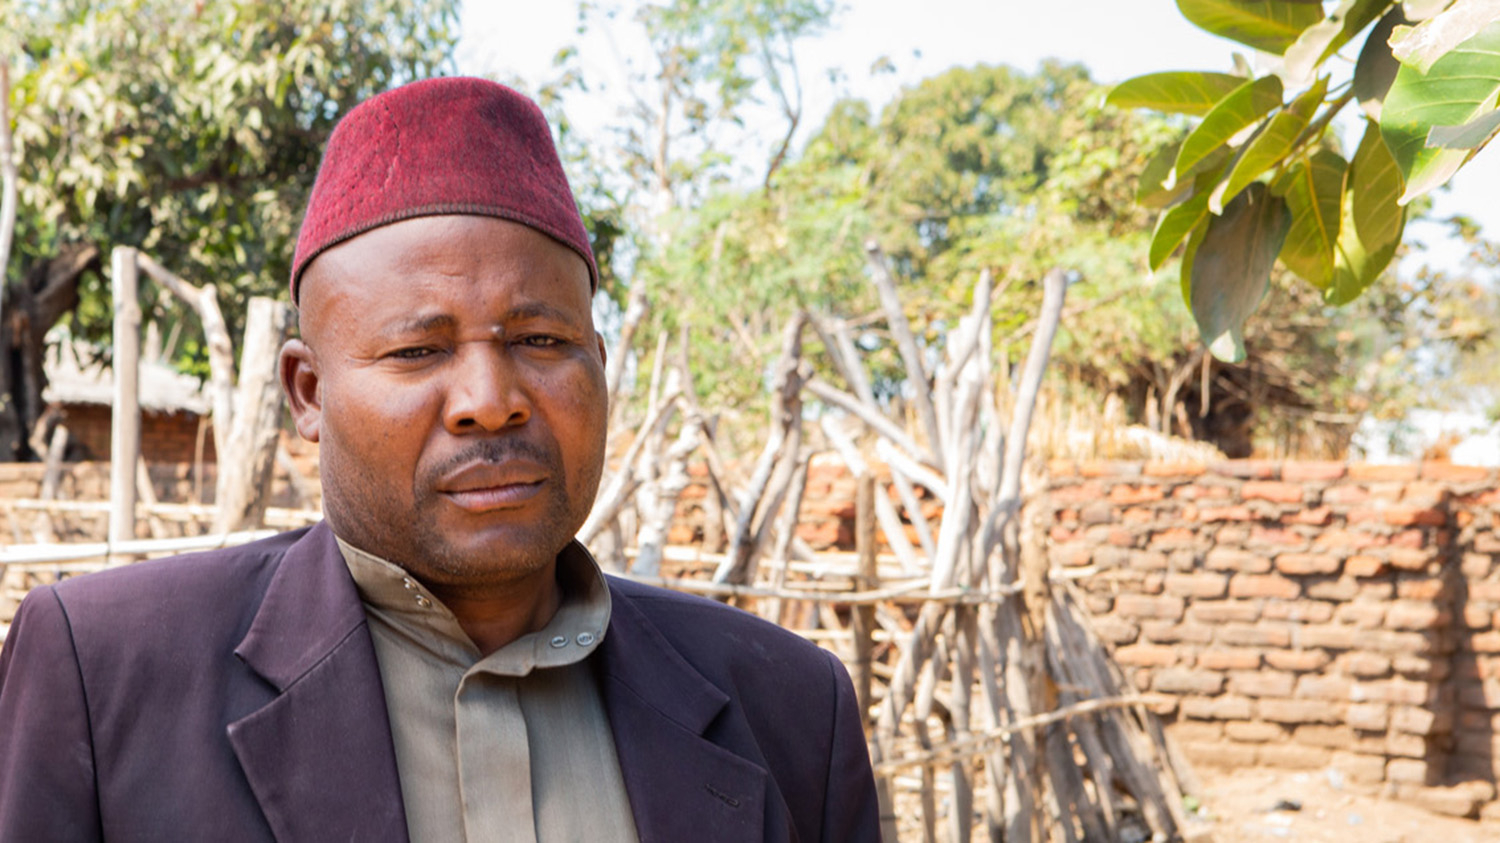 Chief Maganga wears a red hat and smart clothes in his village.